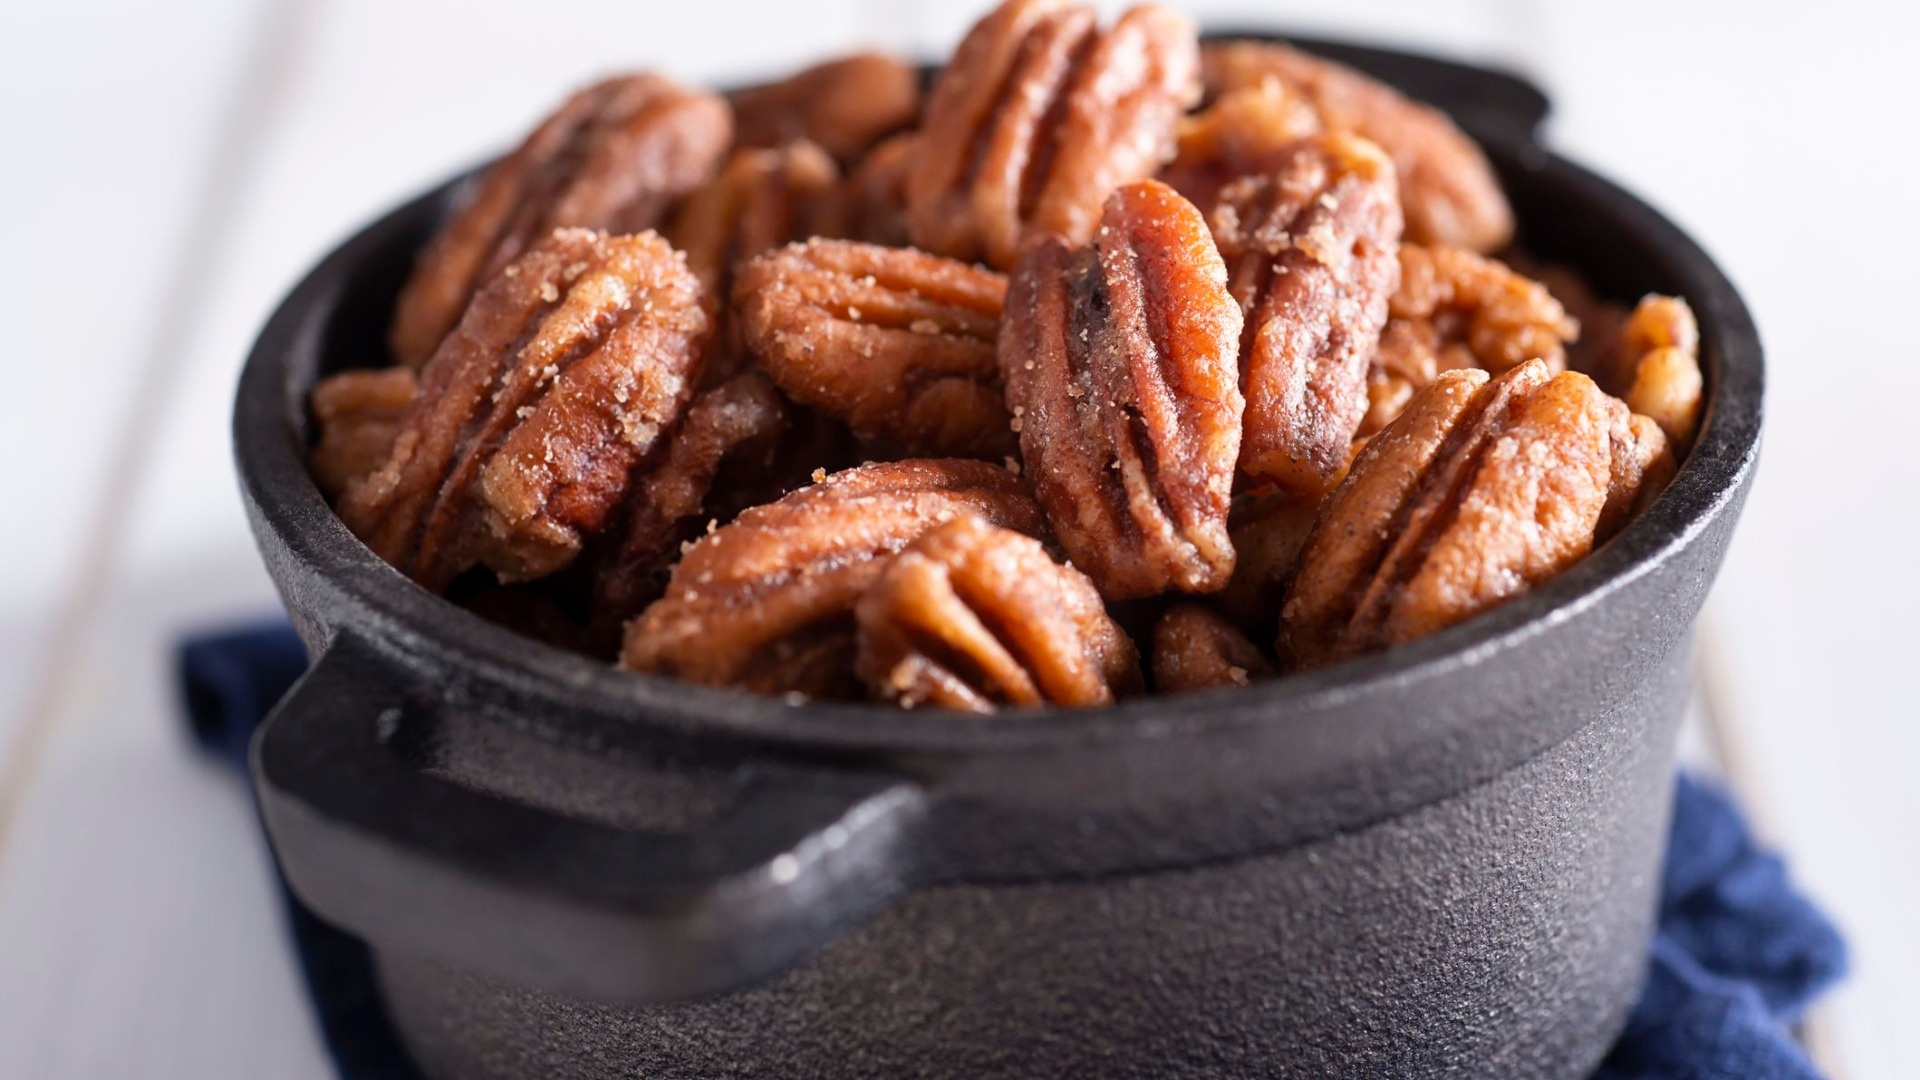 Pecans: One of the most popular edible nuts native to North America and Mexico. 1920x1080 Full HD Wallpaper.